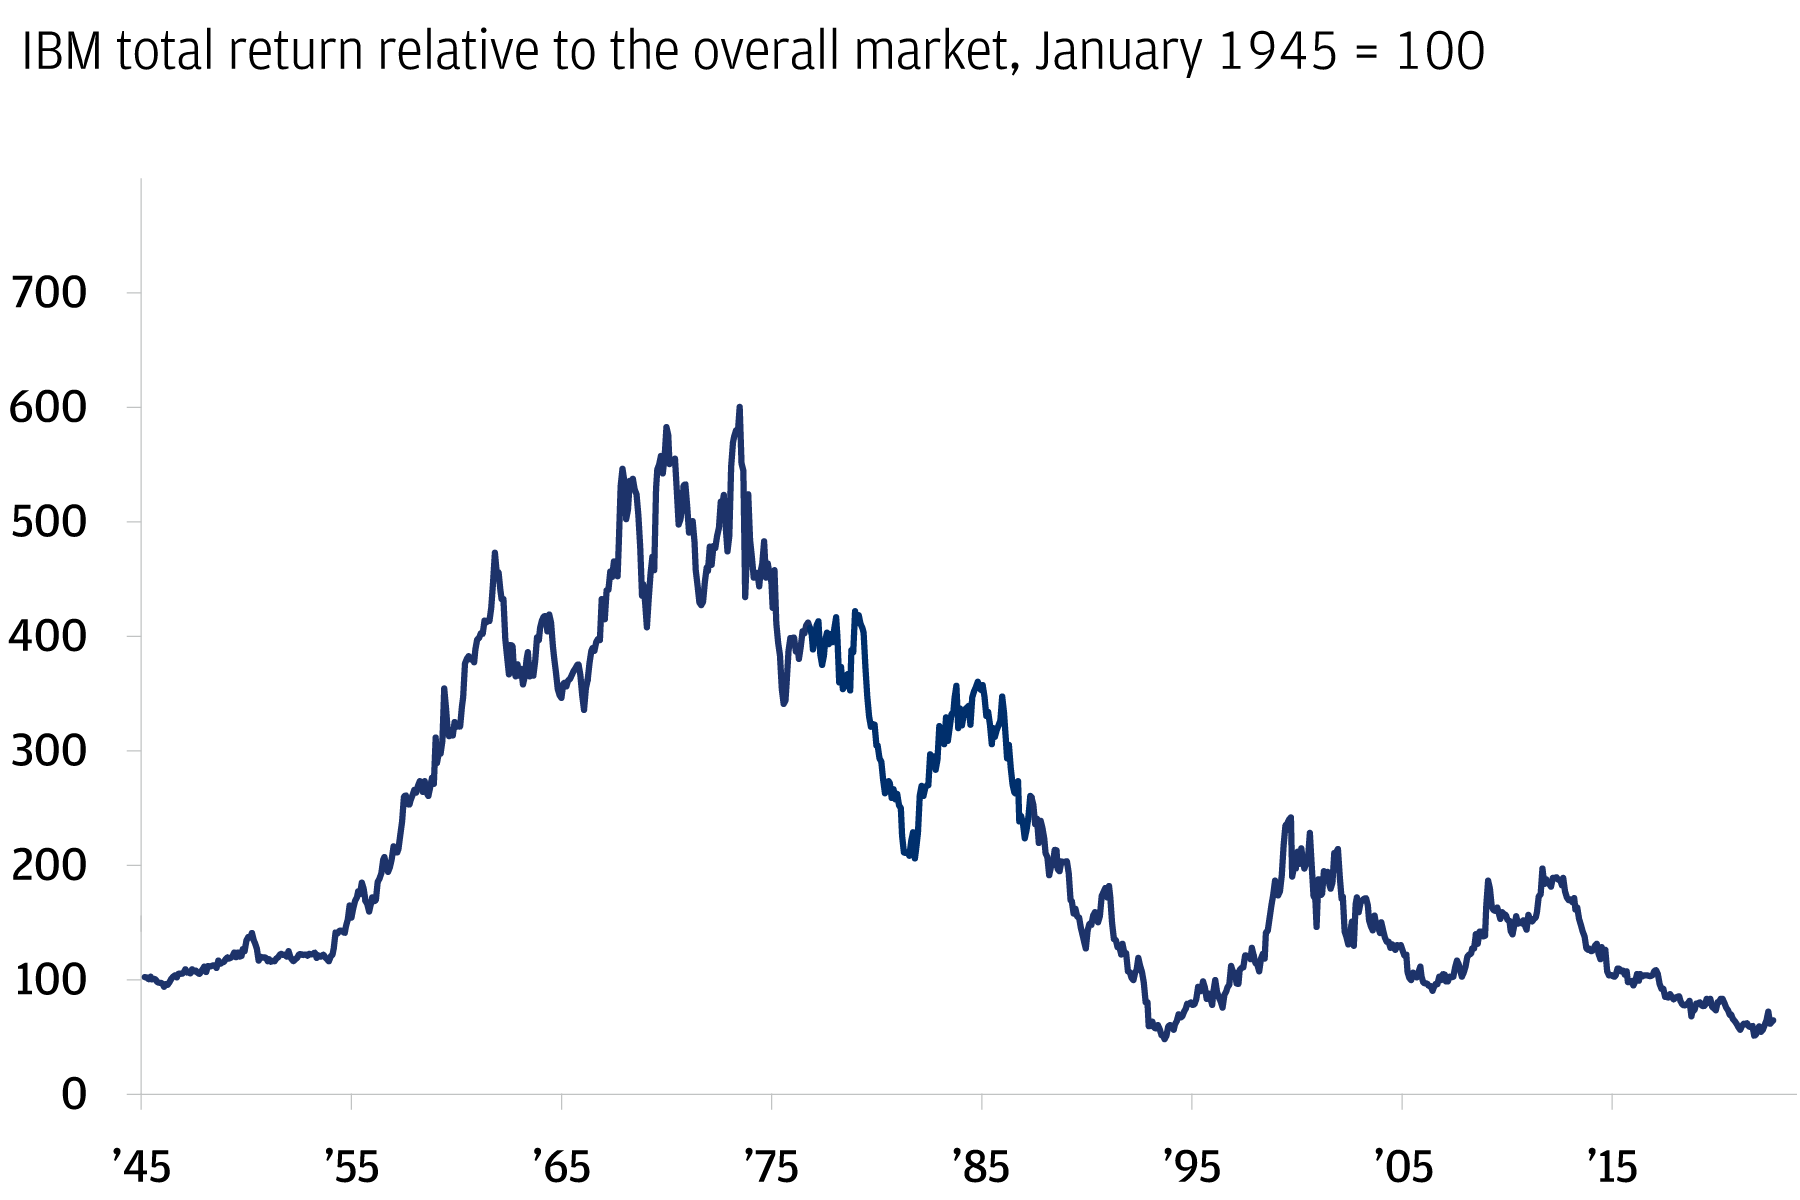 The chart shows IBM total return relative to the average of the overall market. 